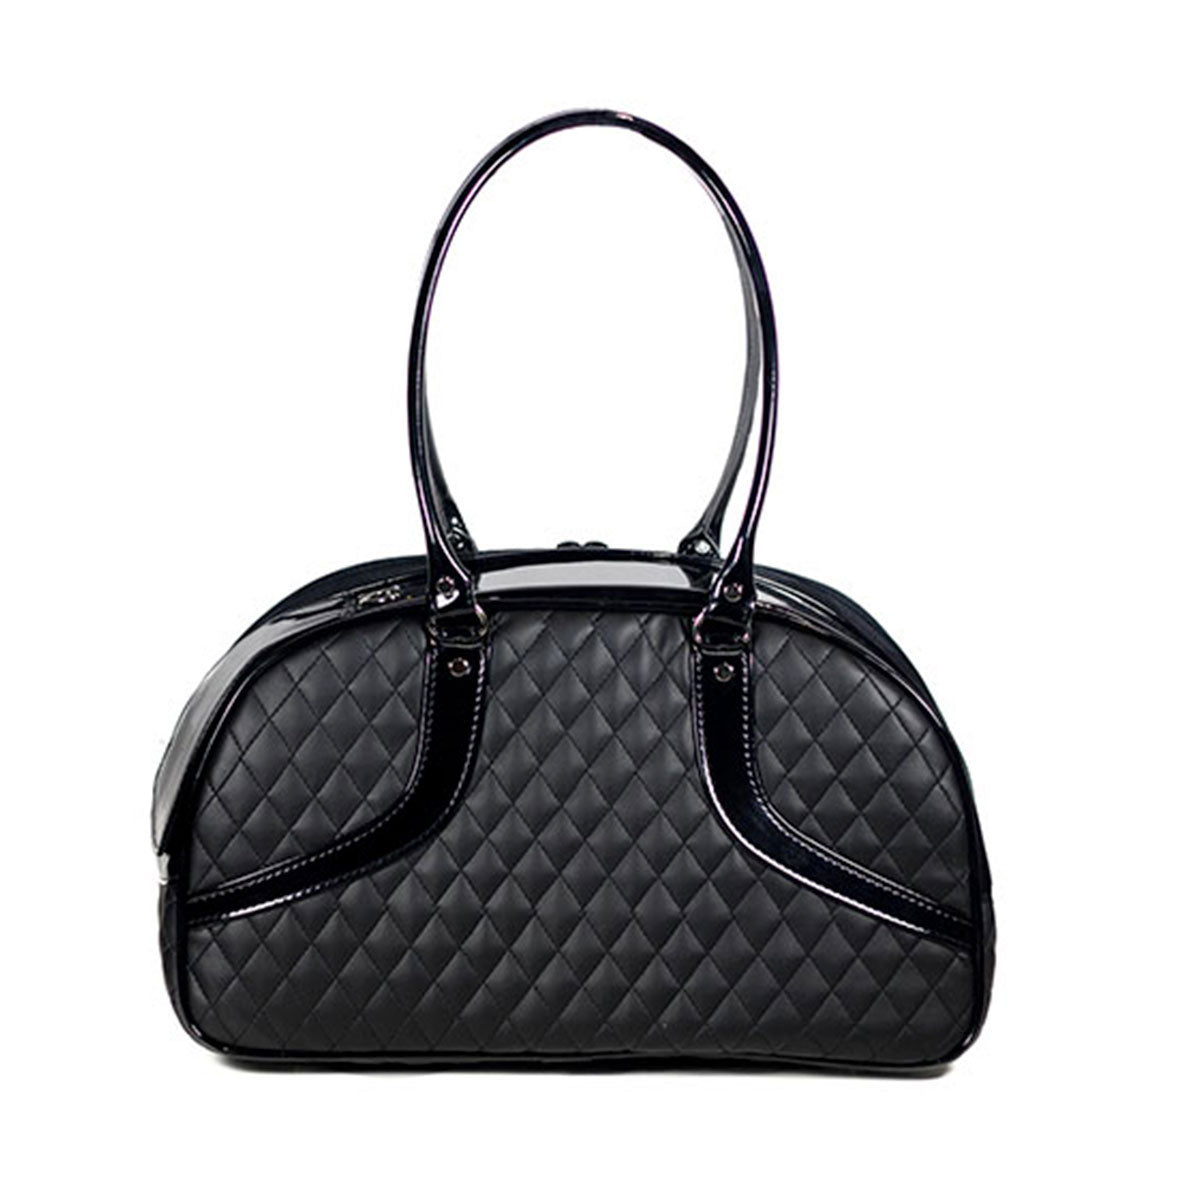 Roxy Pet Carrier - Black Quilted Luxe | Pawlicious & Company